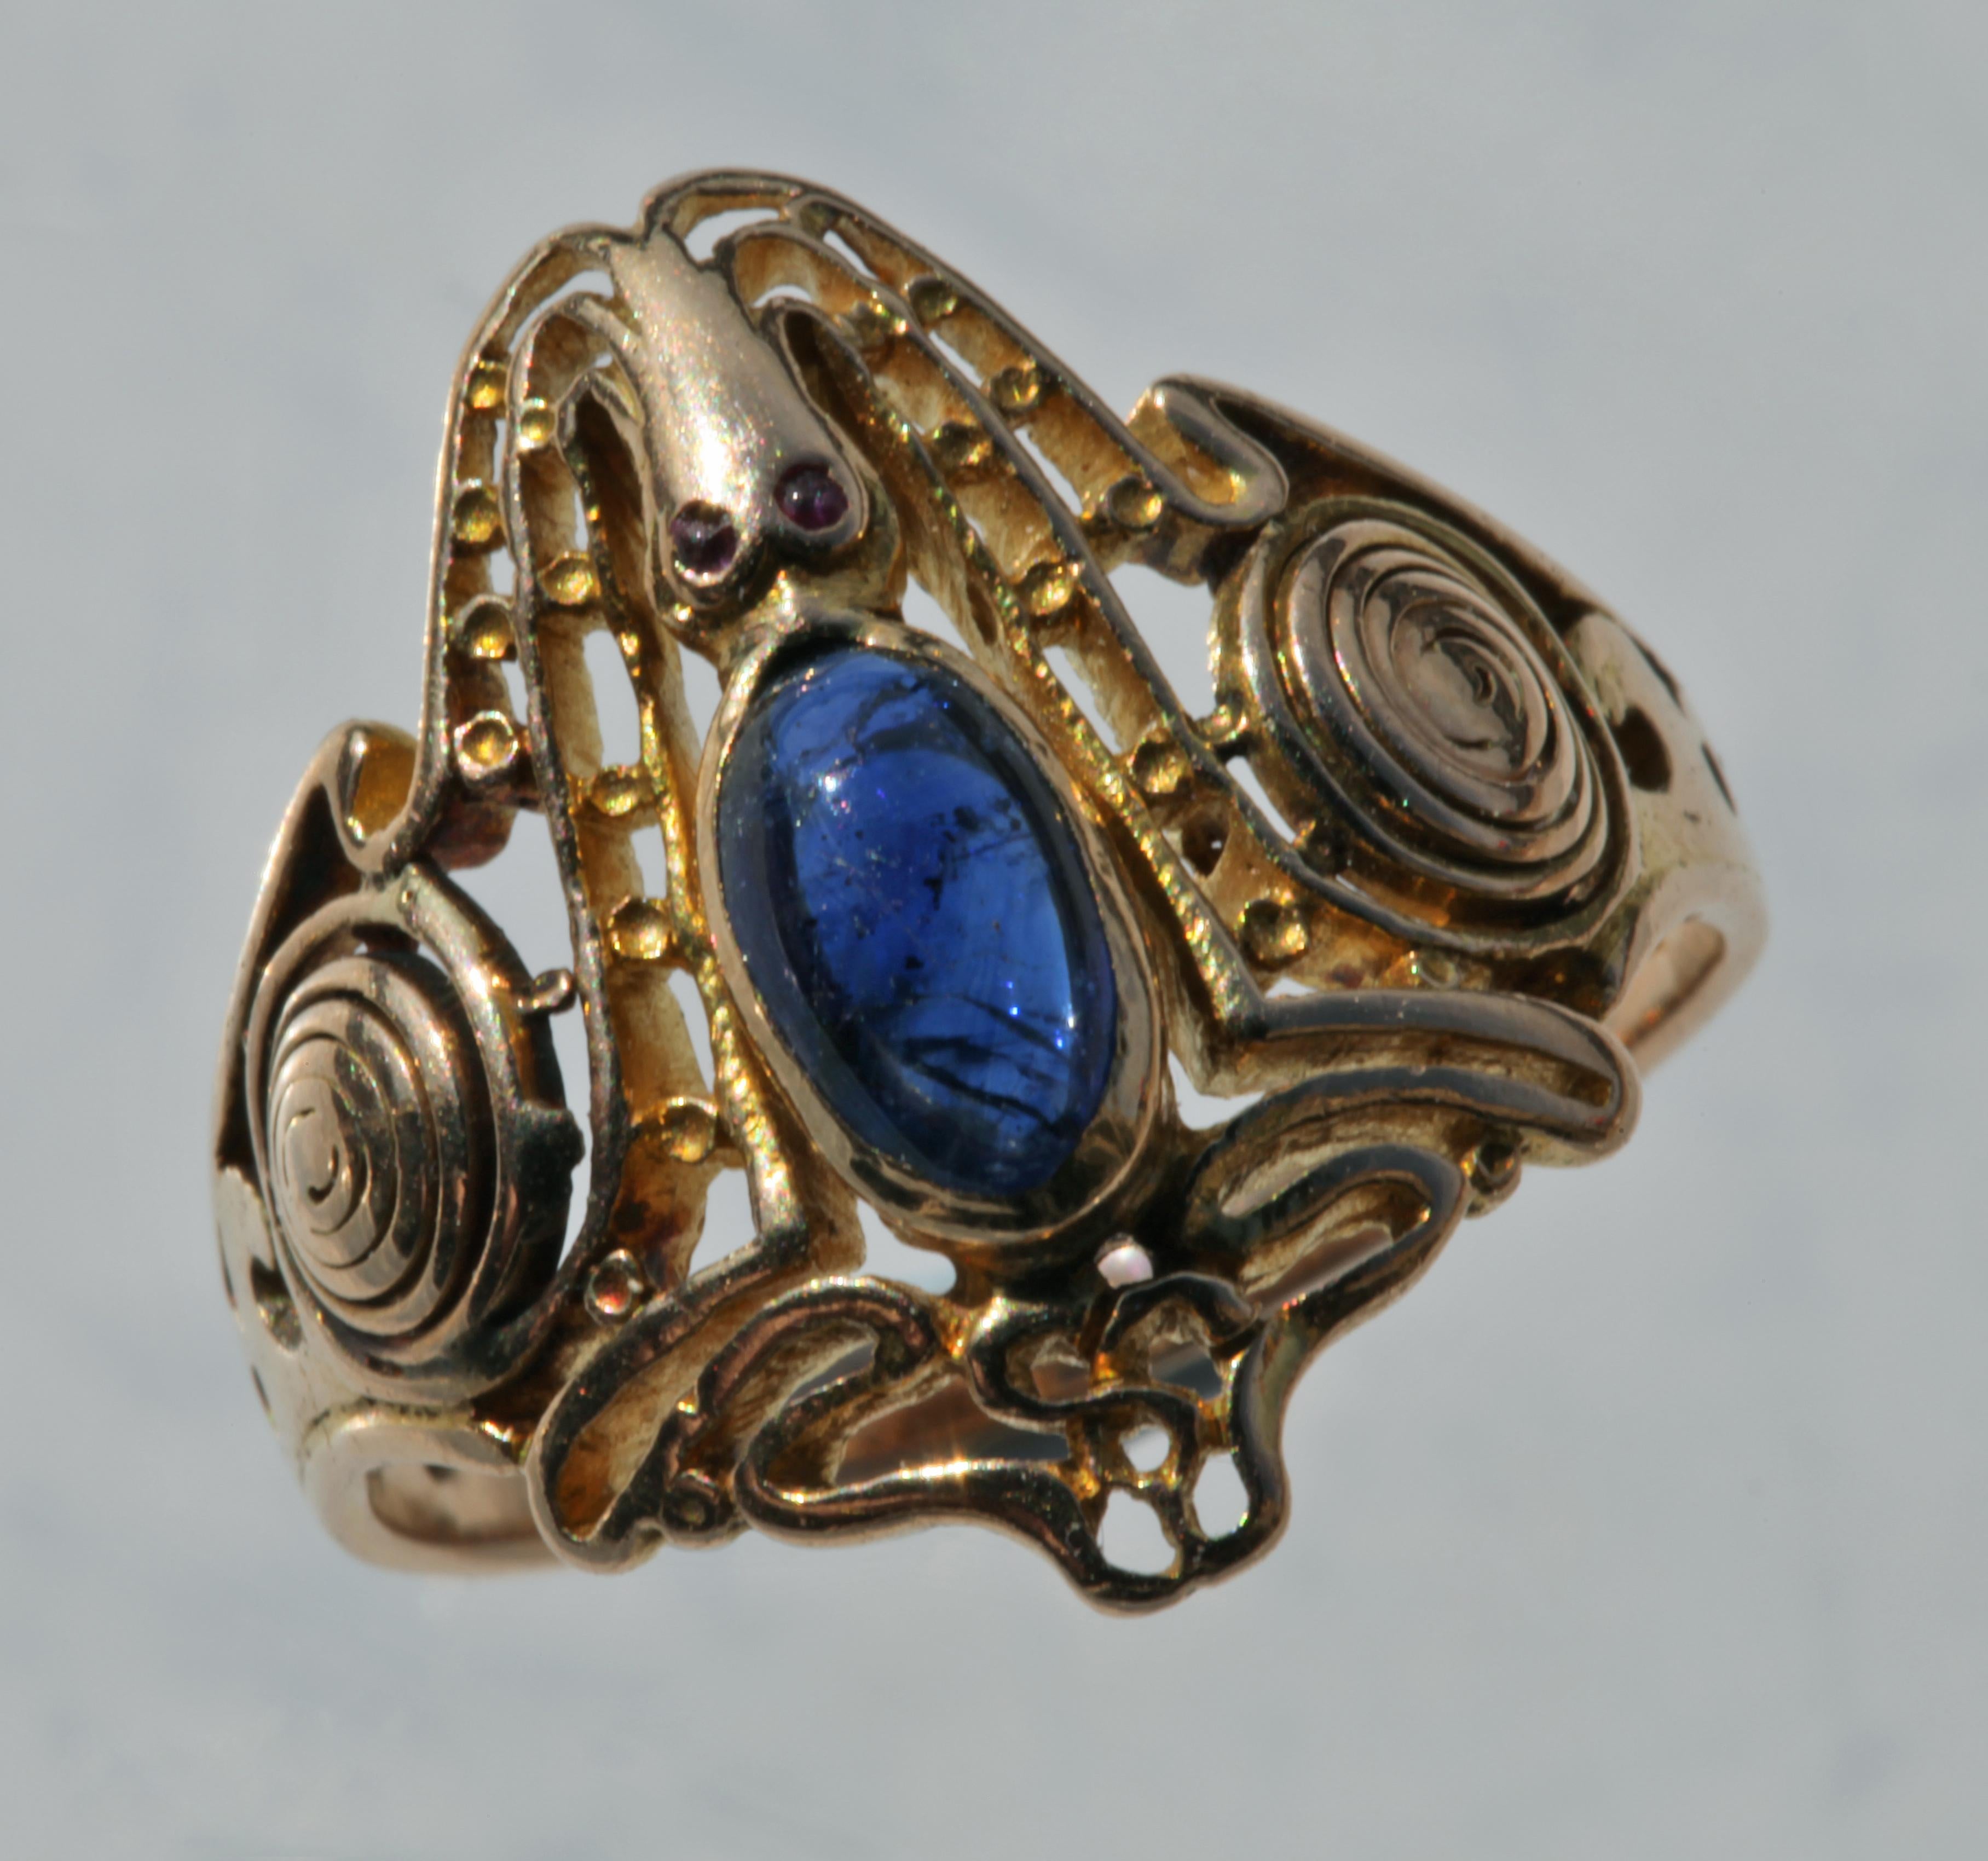 An exceptional example of Rothmuller's exotic jewelry designs featuring a stylised octopus with a cabochon sapphire body. This representation of the octopus is a striking example of the decorative portrayal of this fascinating creature.
Illustrated